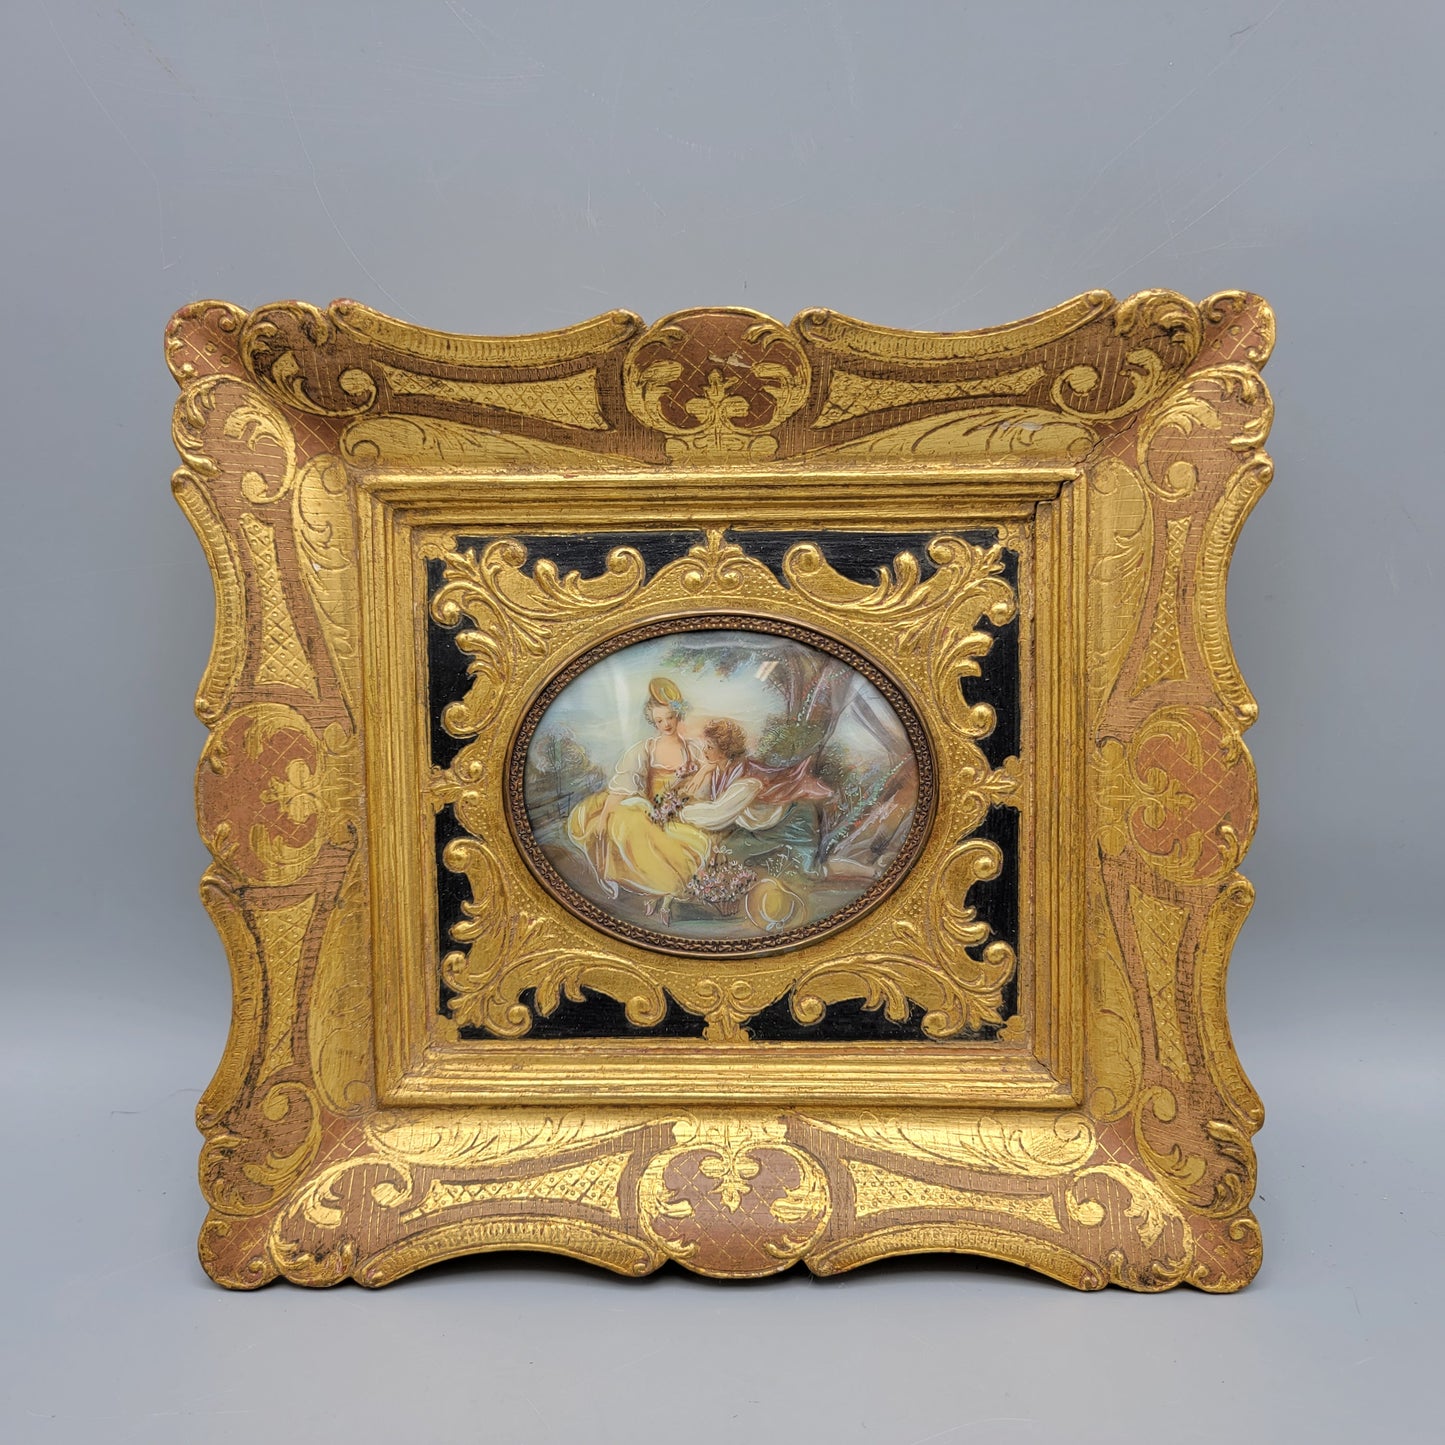 Italian Miniature Painting on Celluloid in Papier Mache Frame